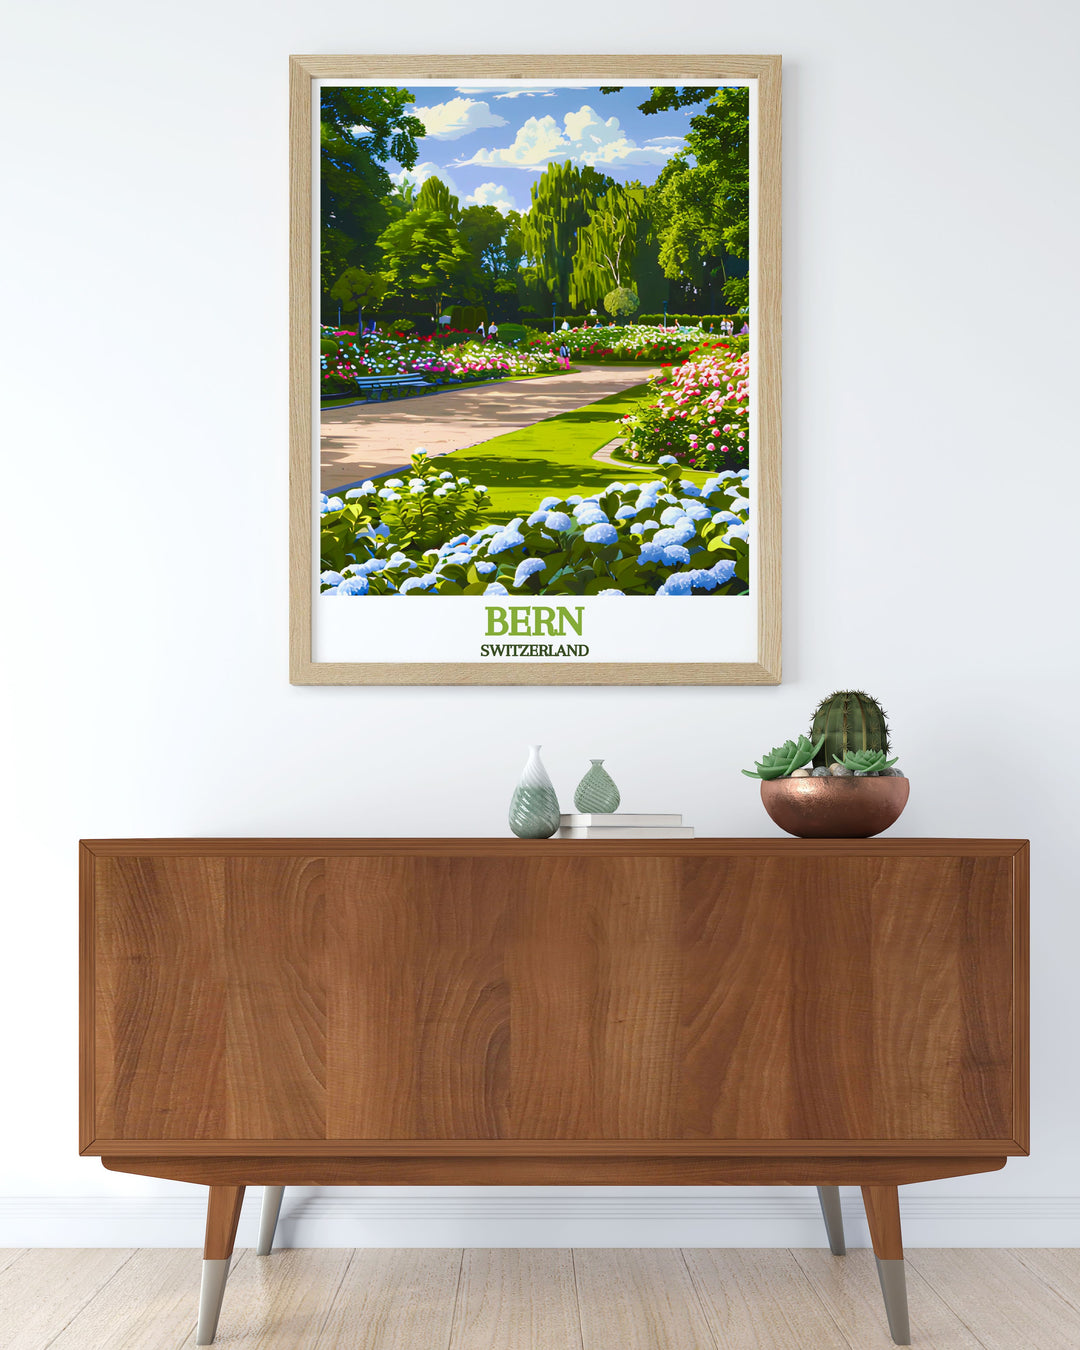 Featuring the lush greenery and colorful blooms of the Rosengarten, this travel poster captures the natural beauty of Bern, ideal for those who appreciate scenic landscapes.